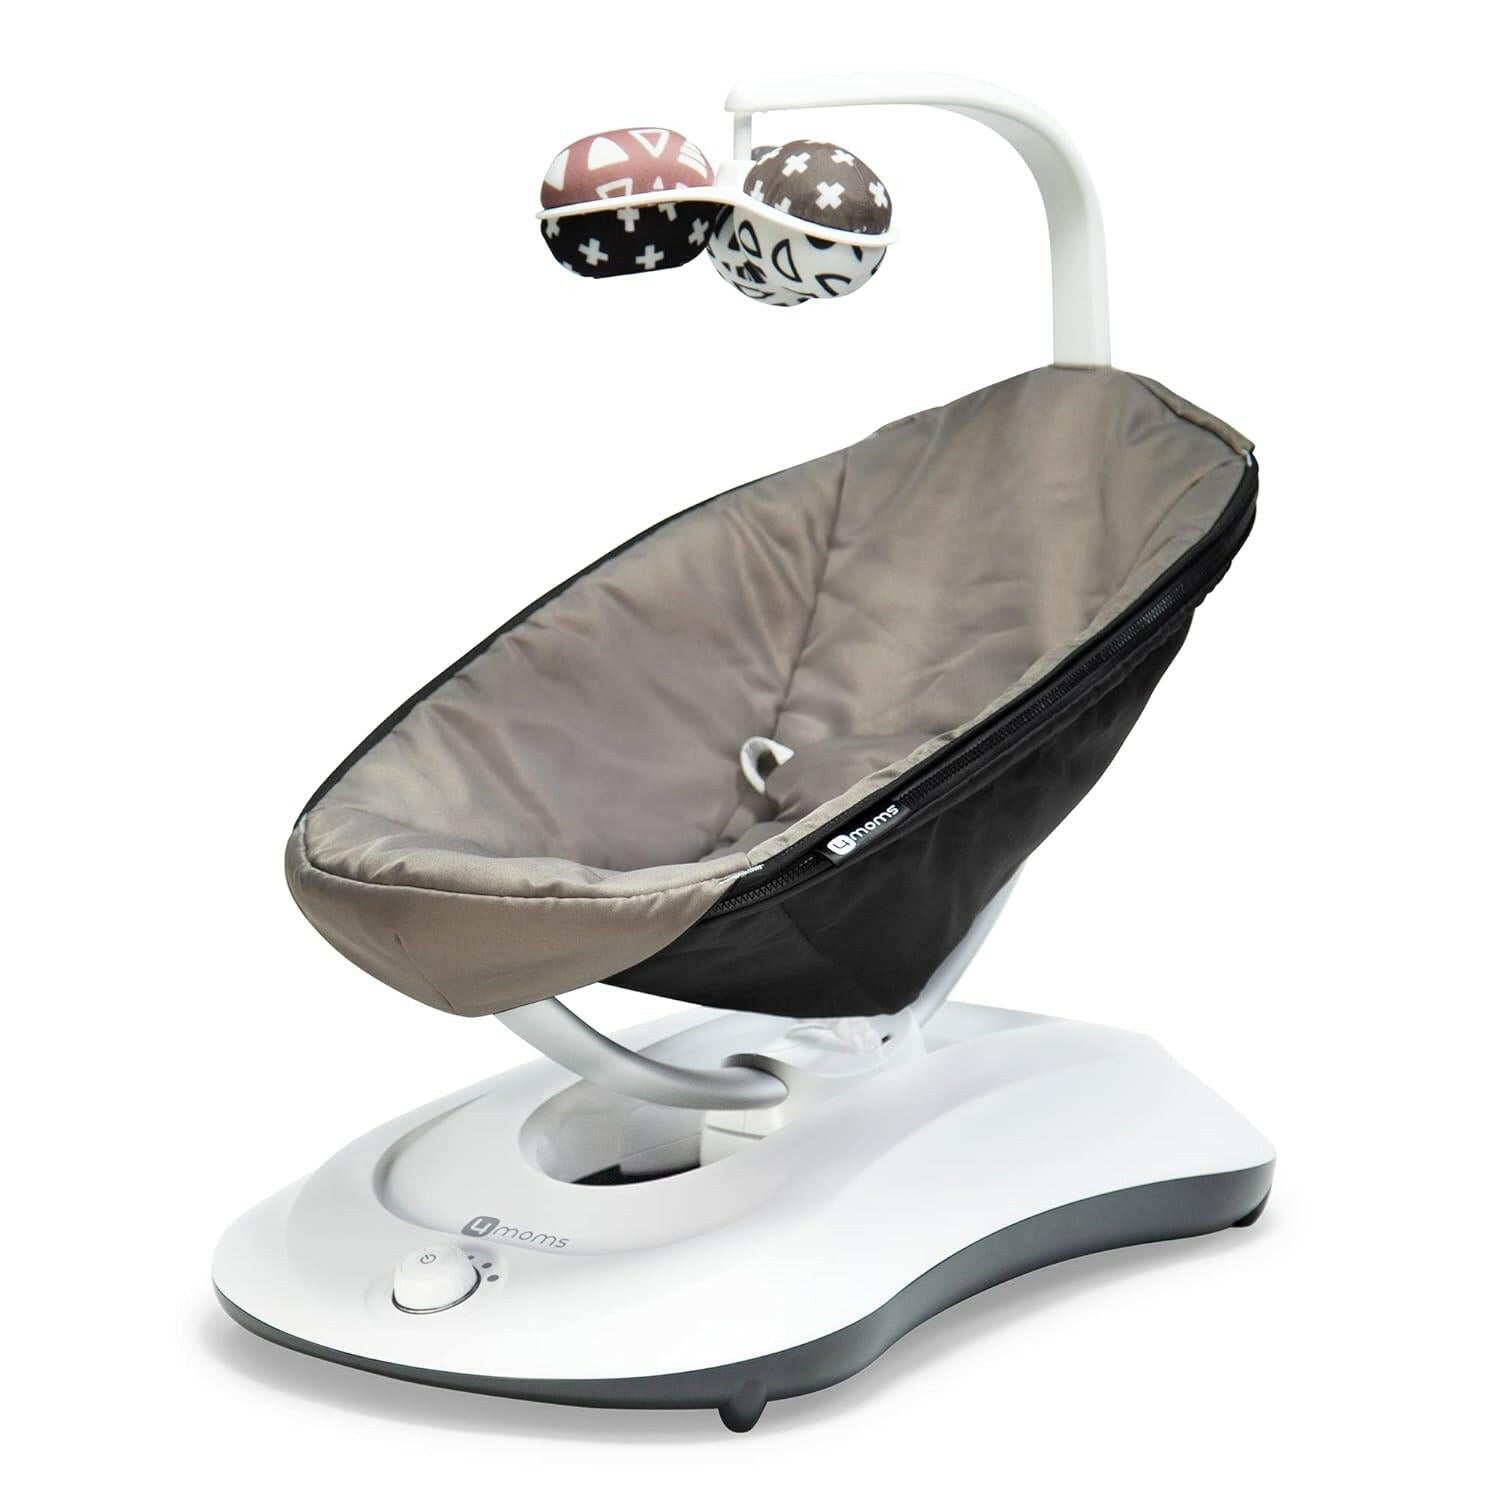 4moms RockaRoo 2.0 Baby Rocker with Front to Back Gliding Motion, Graphite